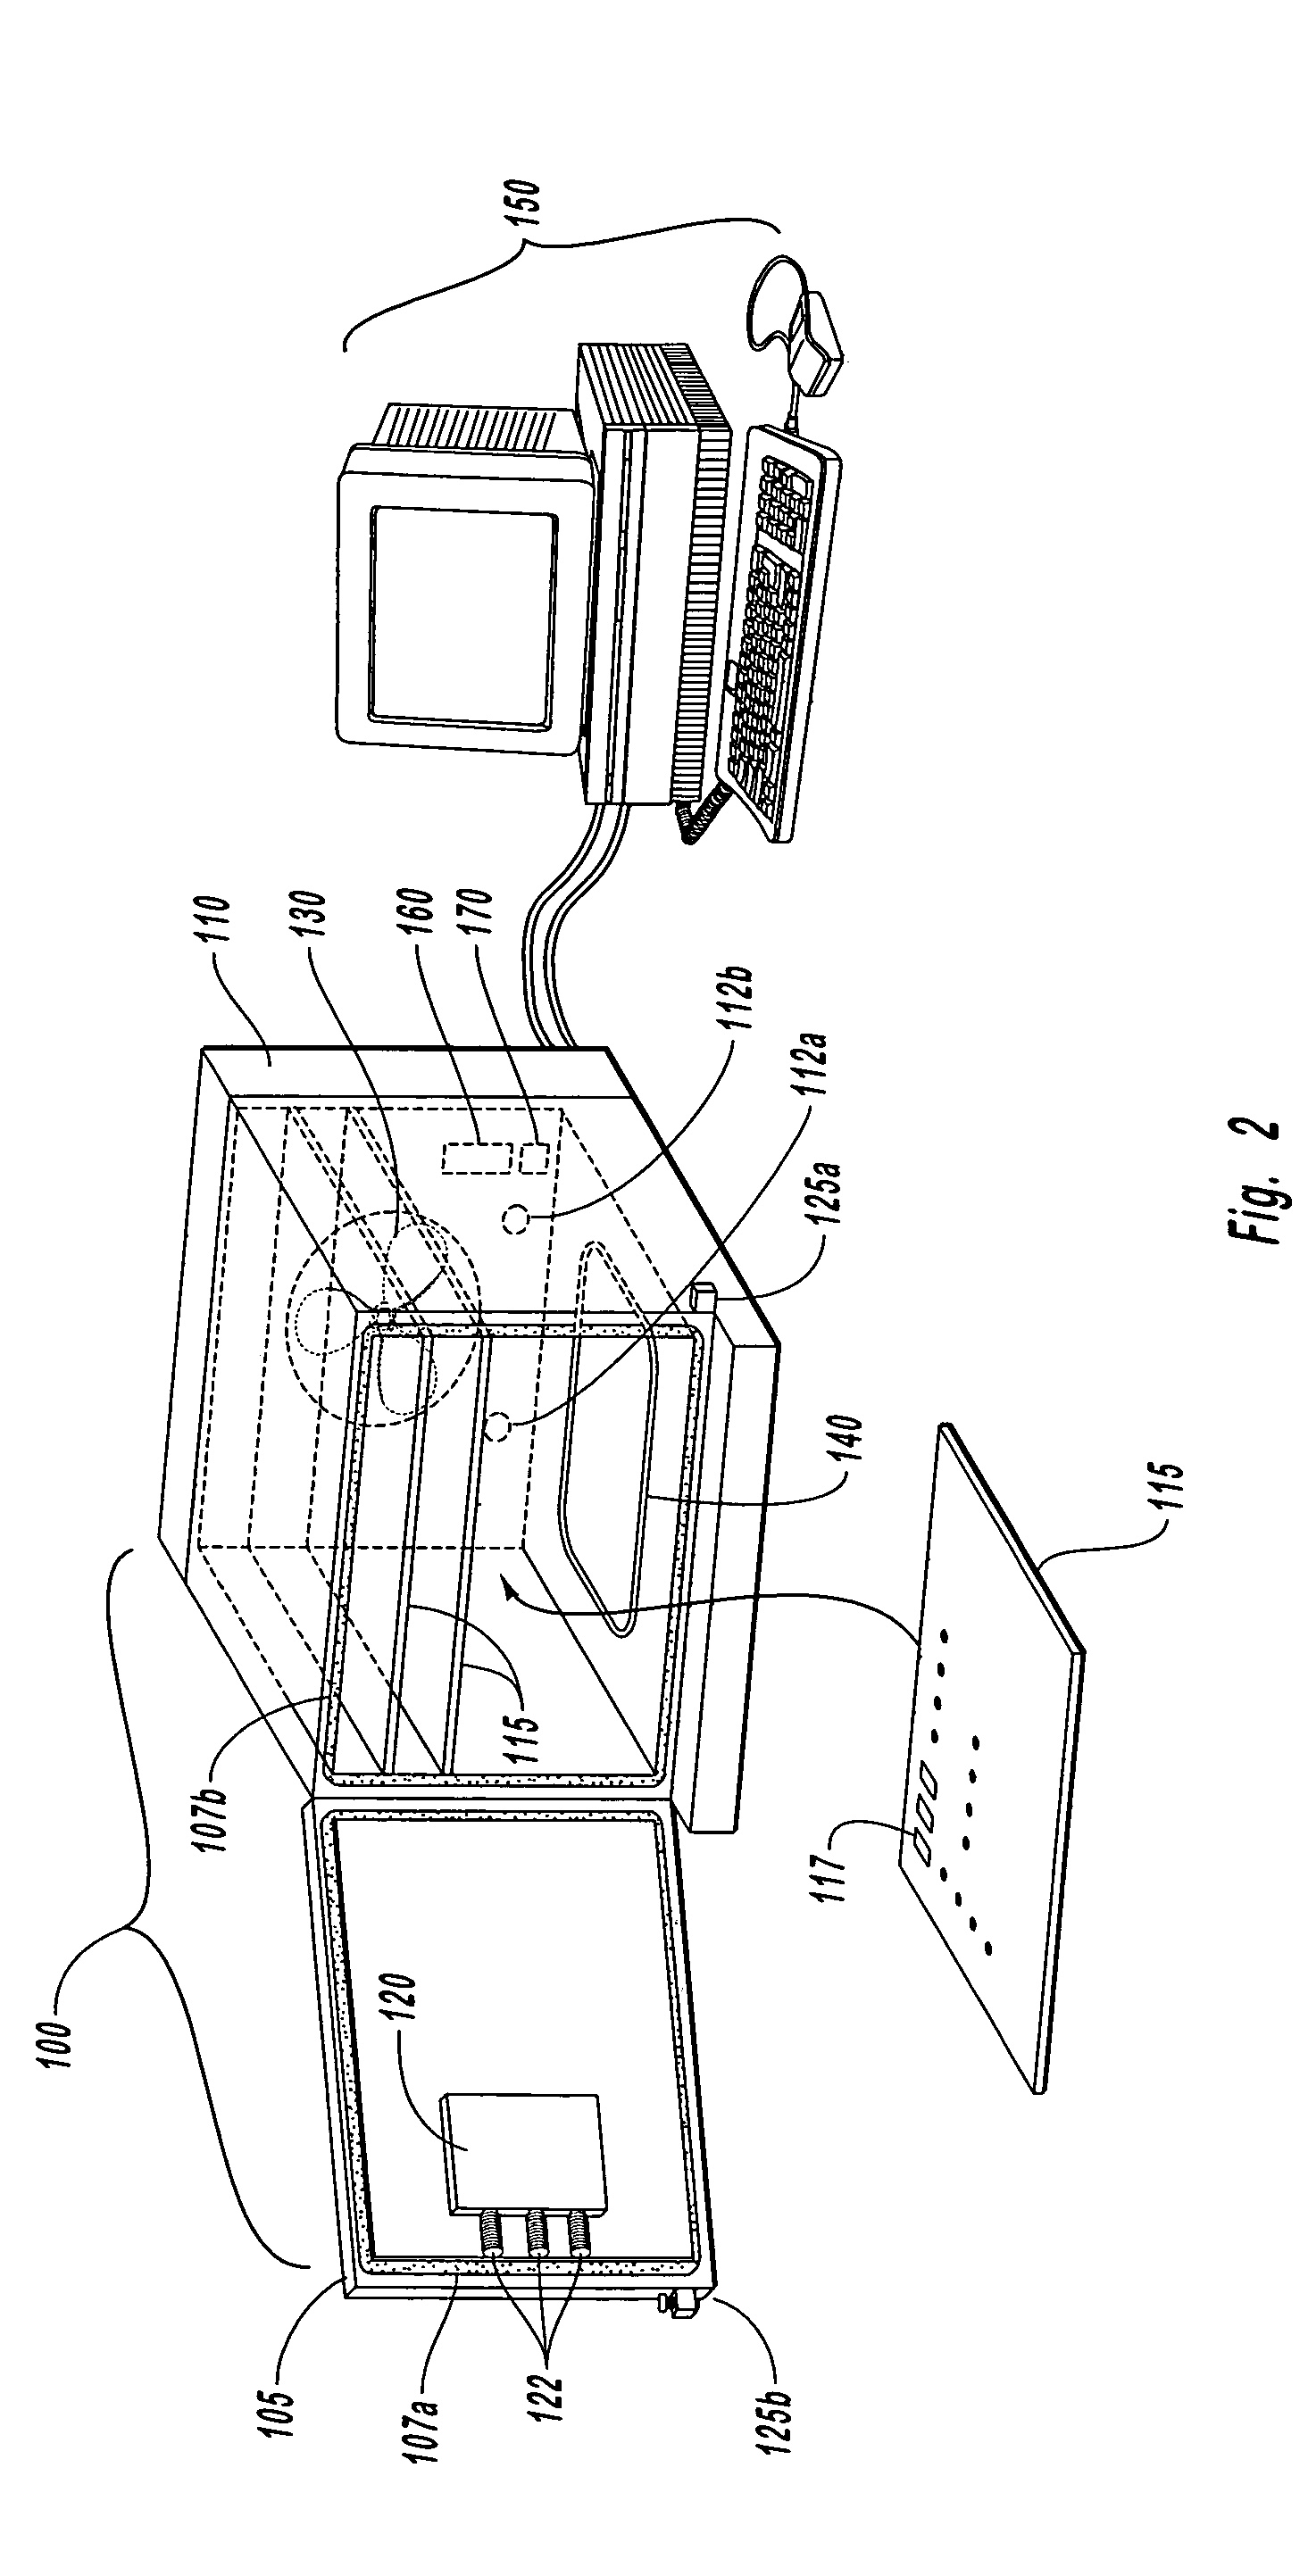 Optical product cure oven